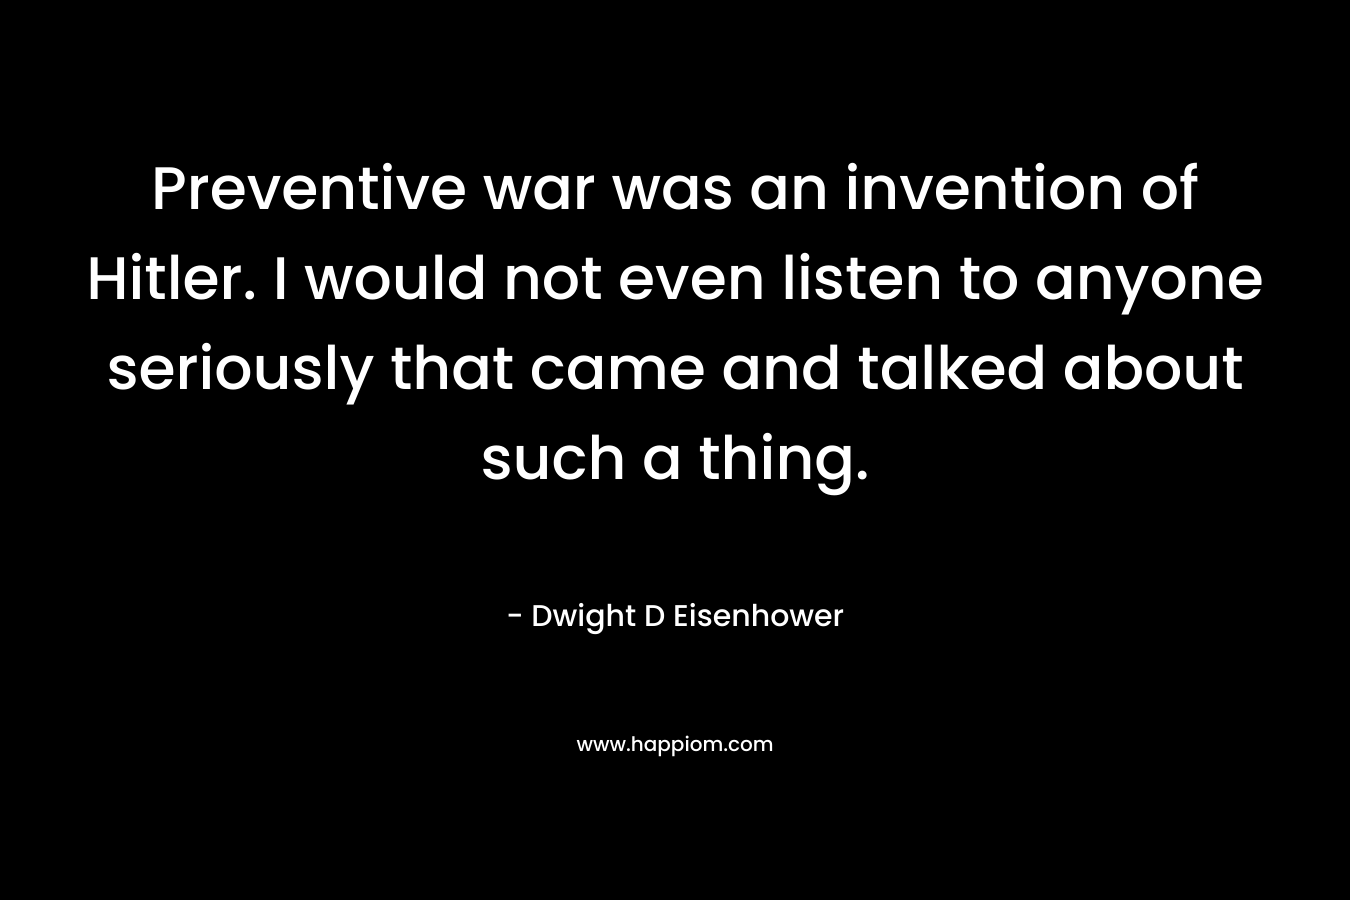 Preventive war was an invention of Hitler. I would not even listen to anyone seriously that came and talked about such a thing. – Dwight D Eisenhower